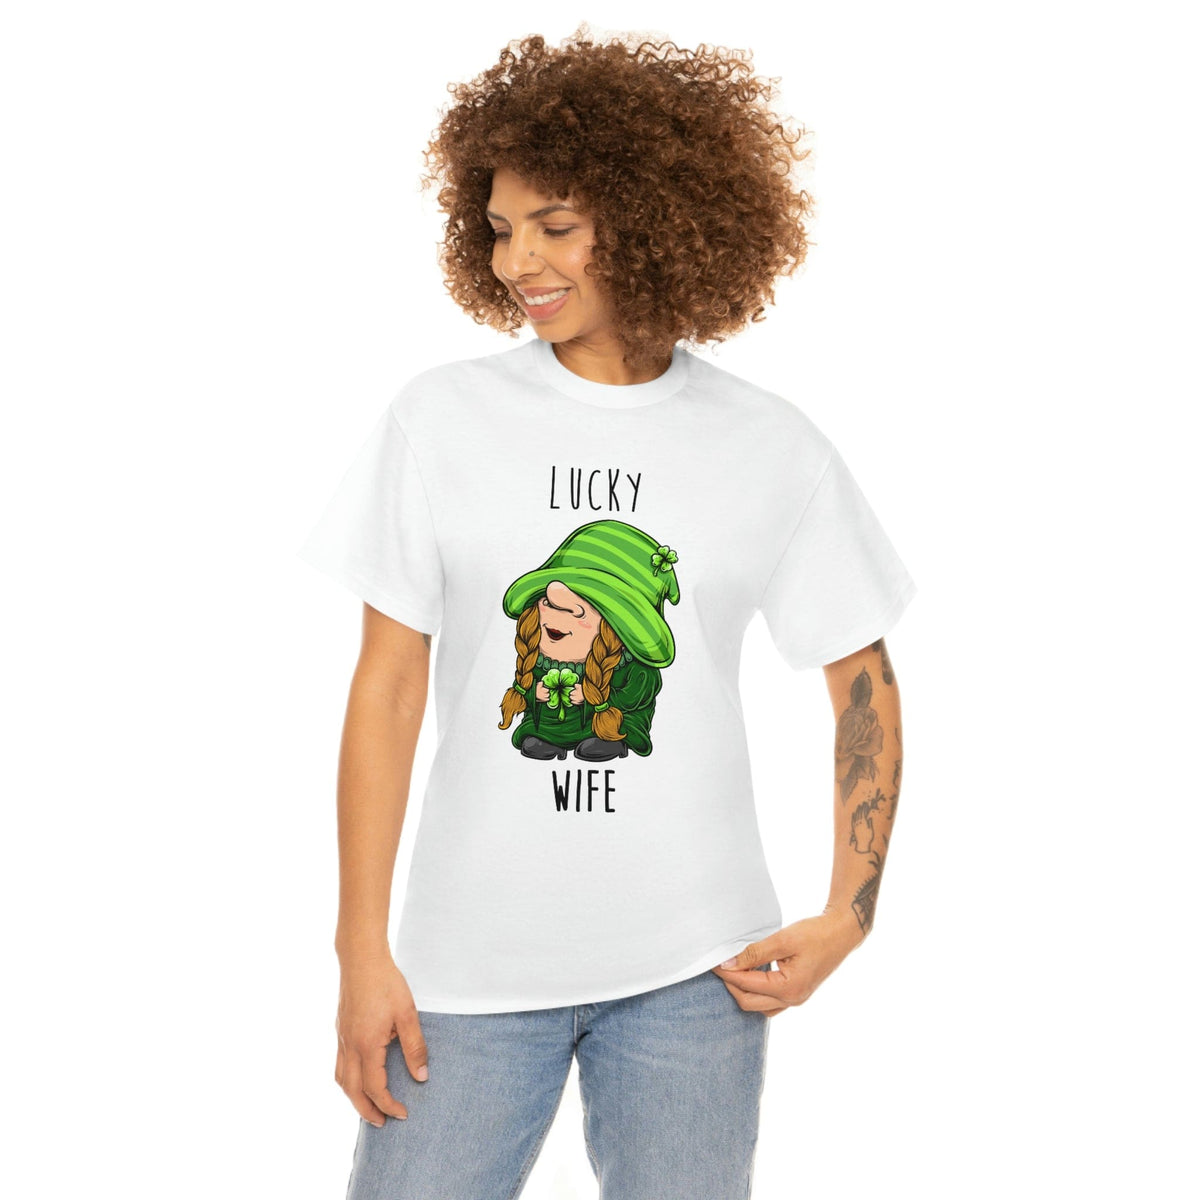 Lucky Husband &amp; Lucky Wife St. Patrick day Drinking Shirt